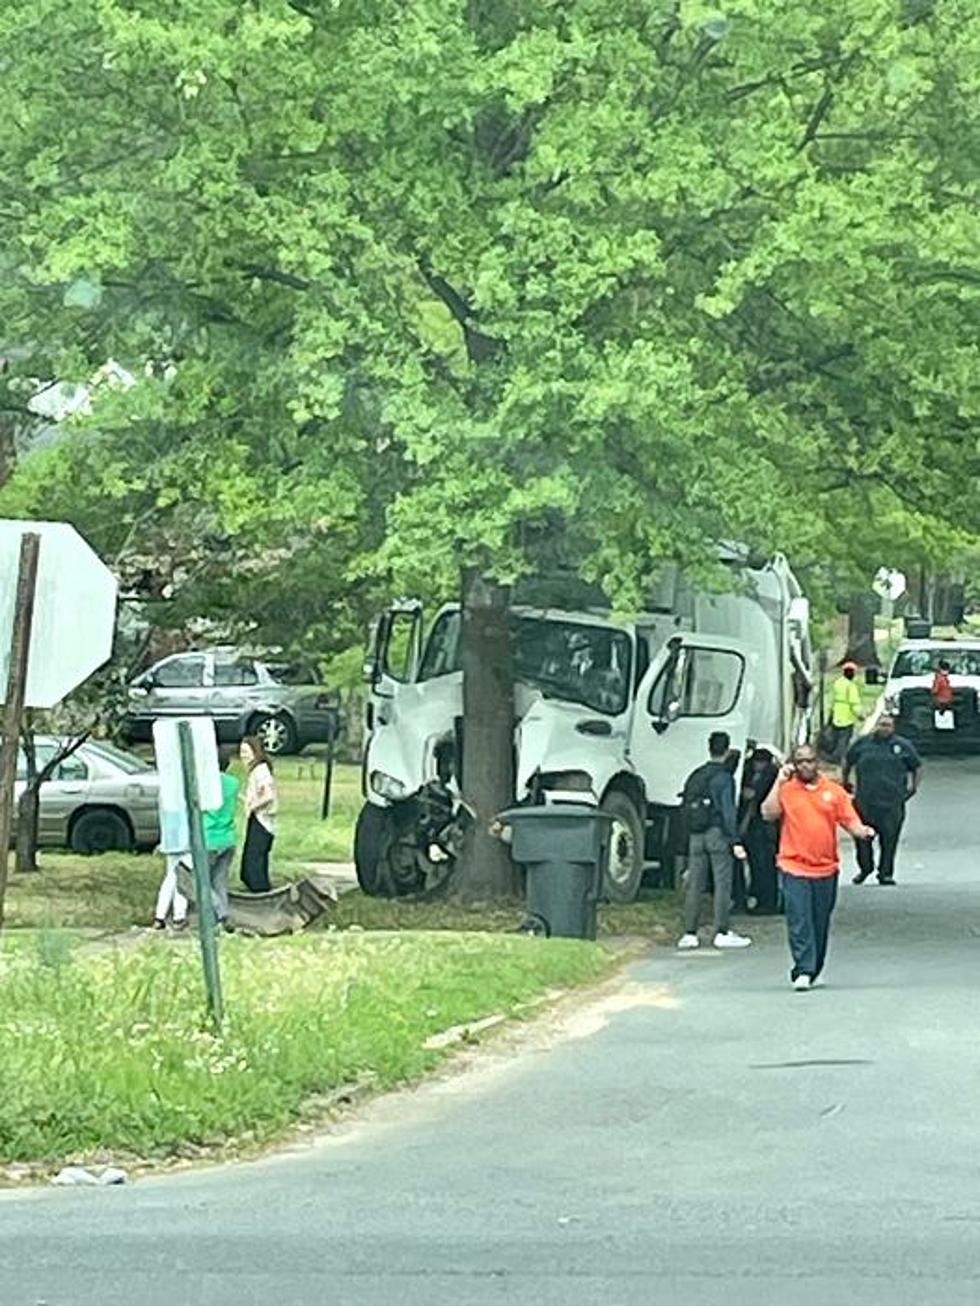 Shreveport Garbage Truck Slams into Tree in South Highlands